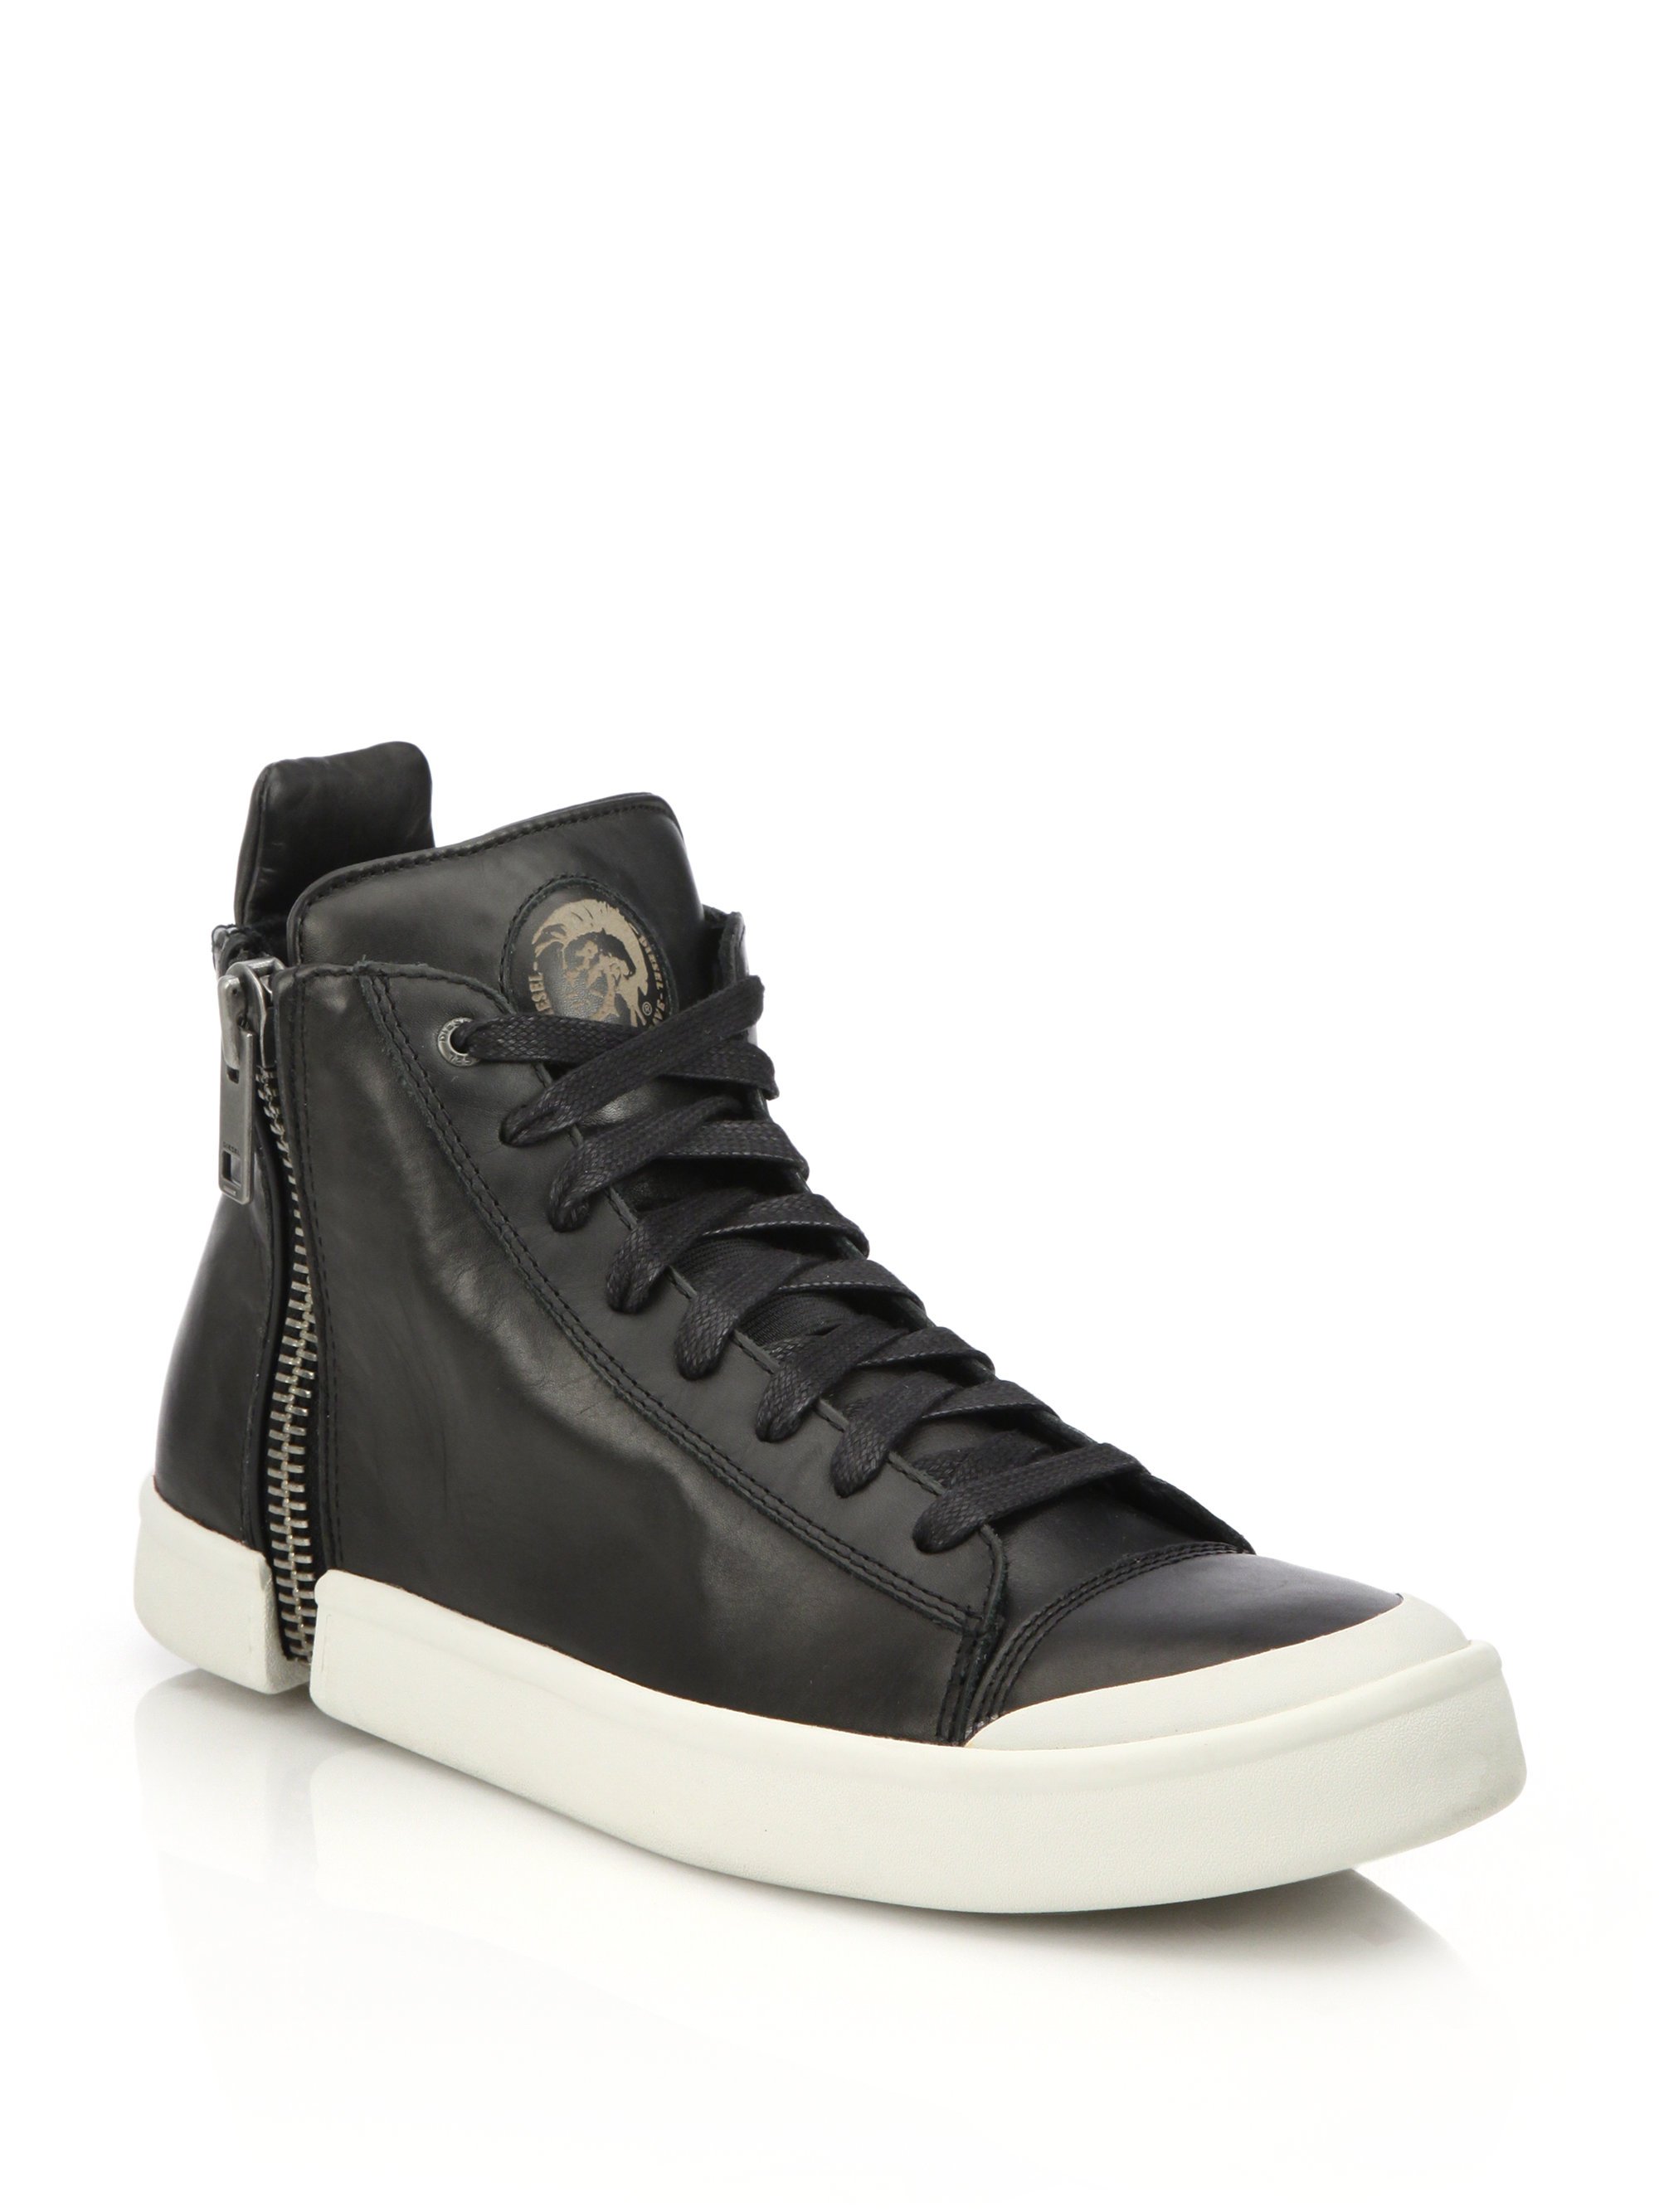 Diesel Nentish Zipper-spliced Leather High-top Sneakers in Black for ...